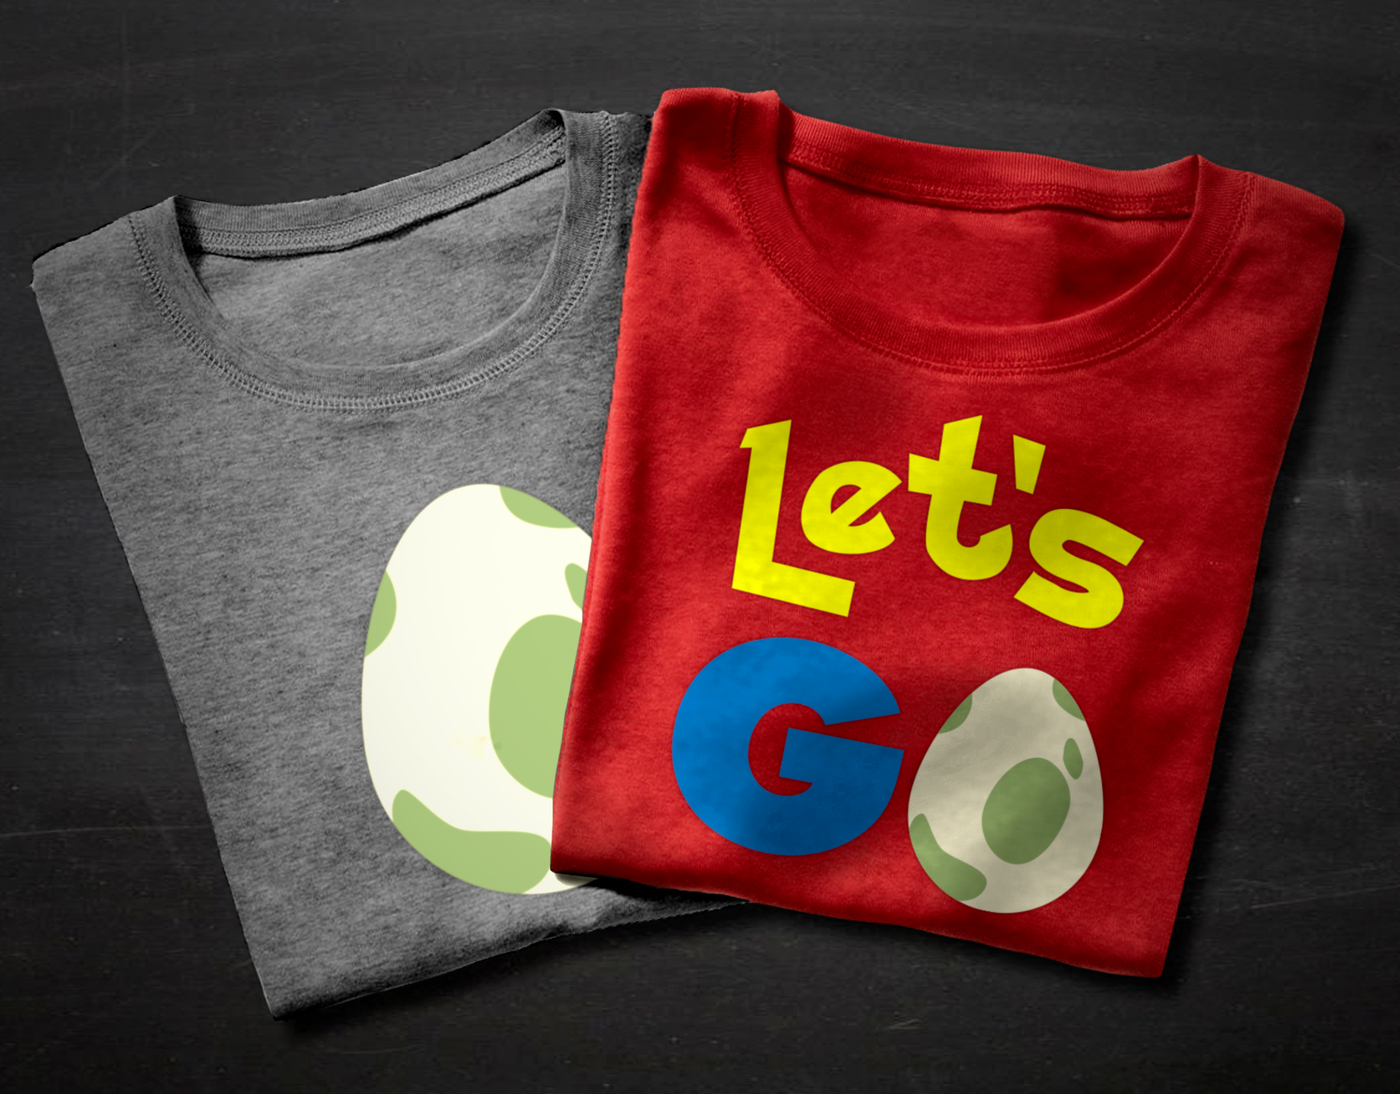 Two folded tees. One says "Let's GO" with a spotted egg in place of the O. The other has a large spotted egg by itself.